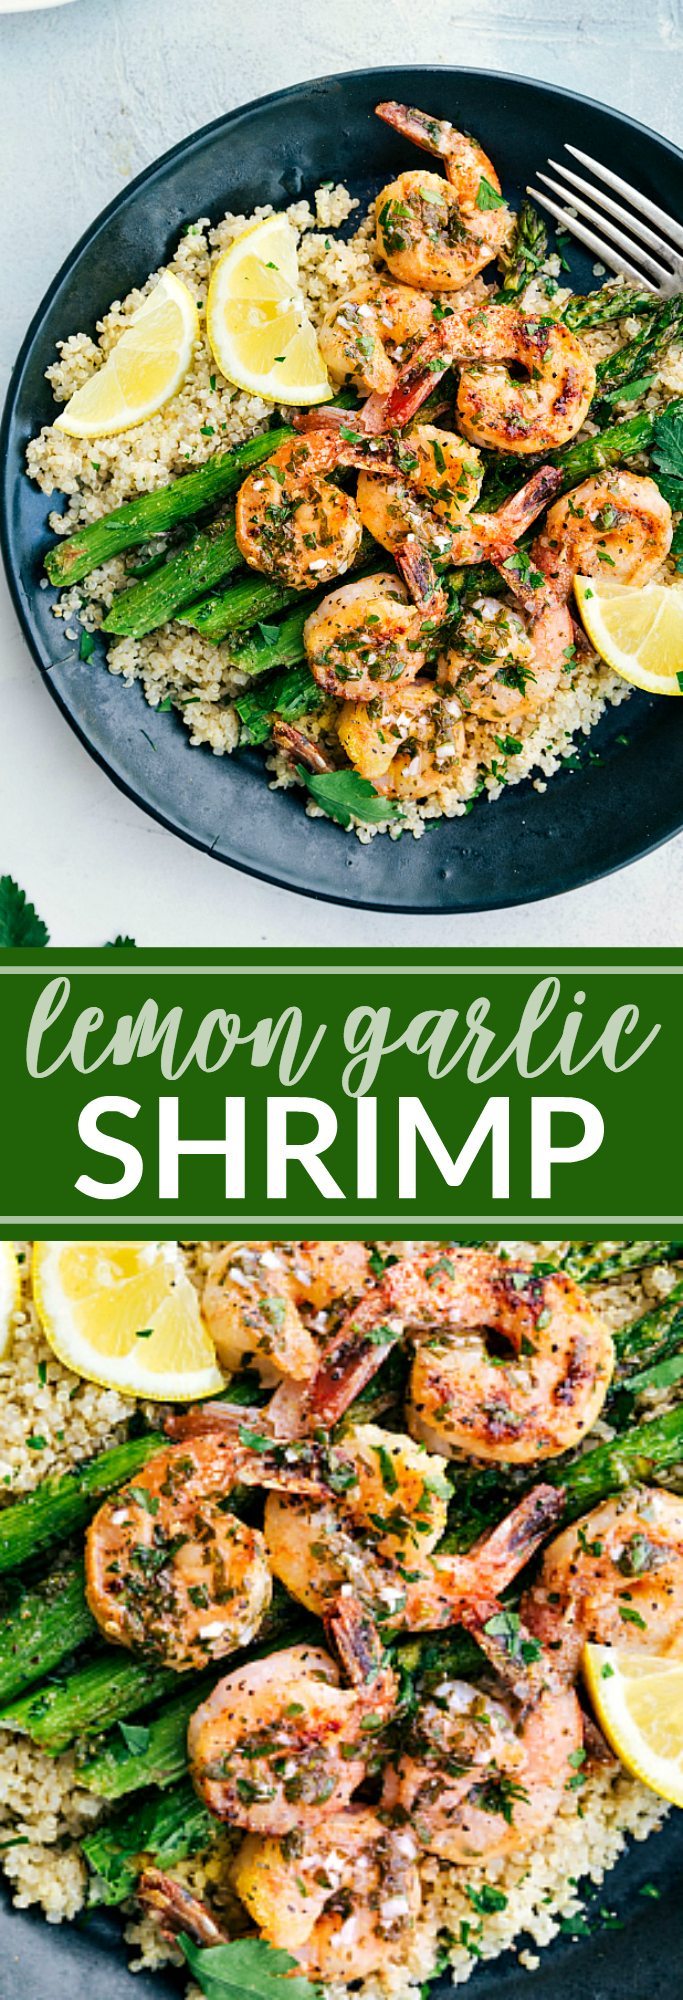 Simple and DELICIOUS Lemon Garlic Shrimp with the best butter sauce! via chelseasmessyapron.com #shrimp #garlic #butter #dinner #easy #30minutes #roasted #asparagus #easy #quick #kidfriendly